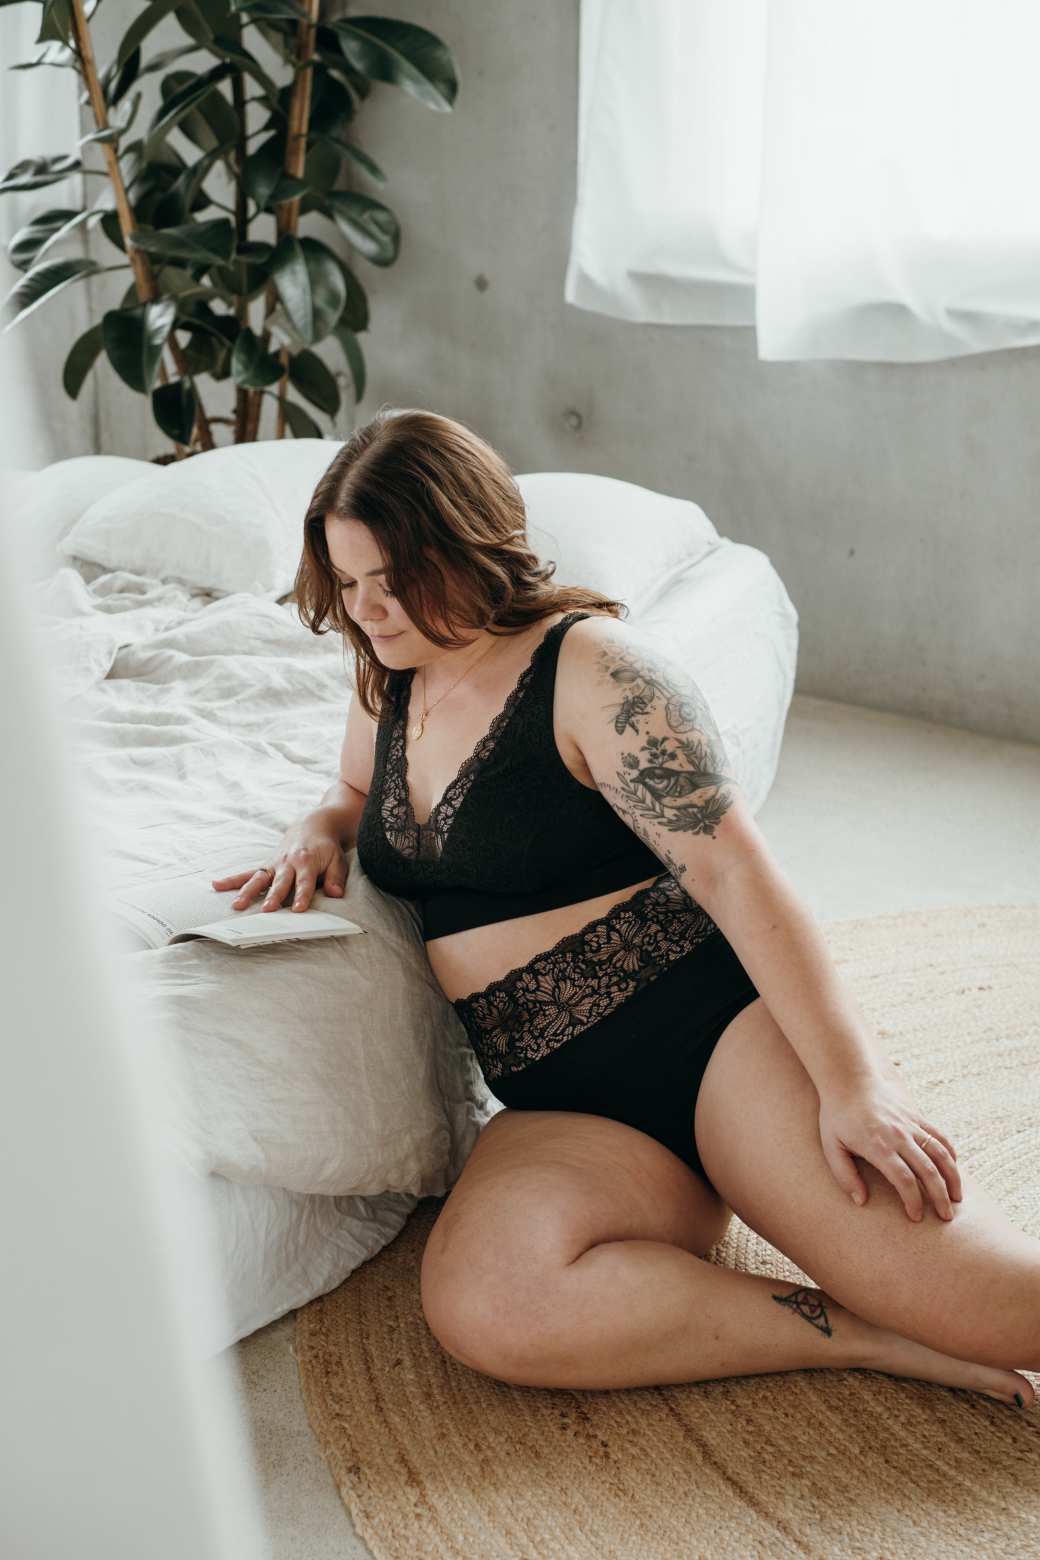 Model in black lingerie made from sustainable materials sits in front of bed and reads.